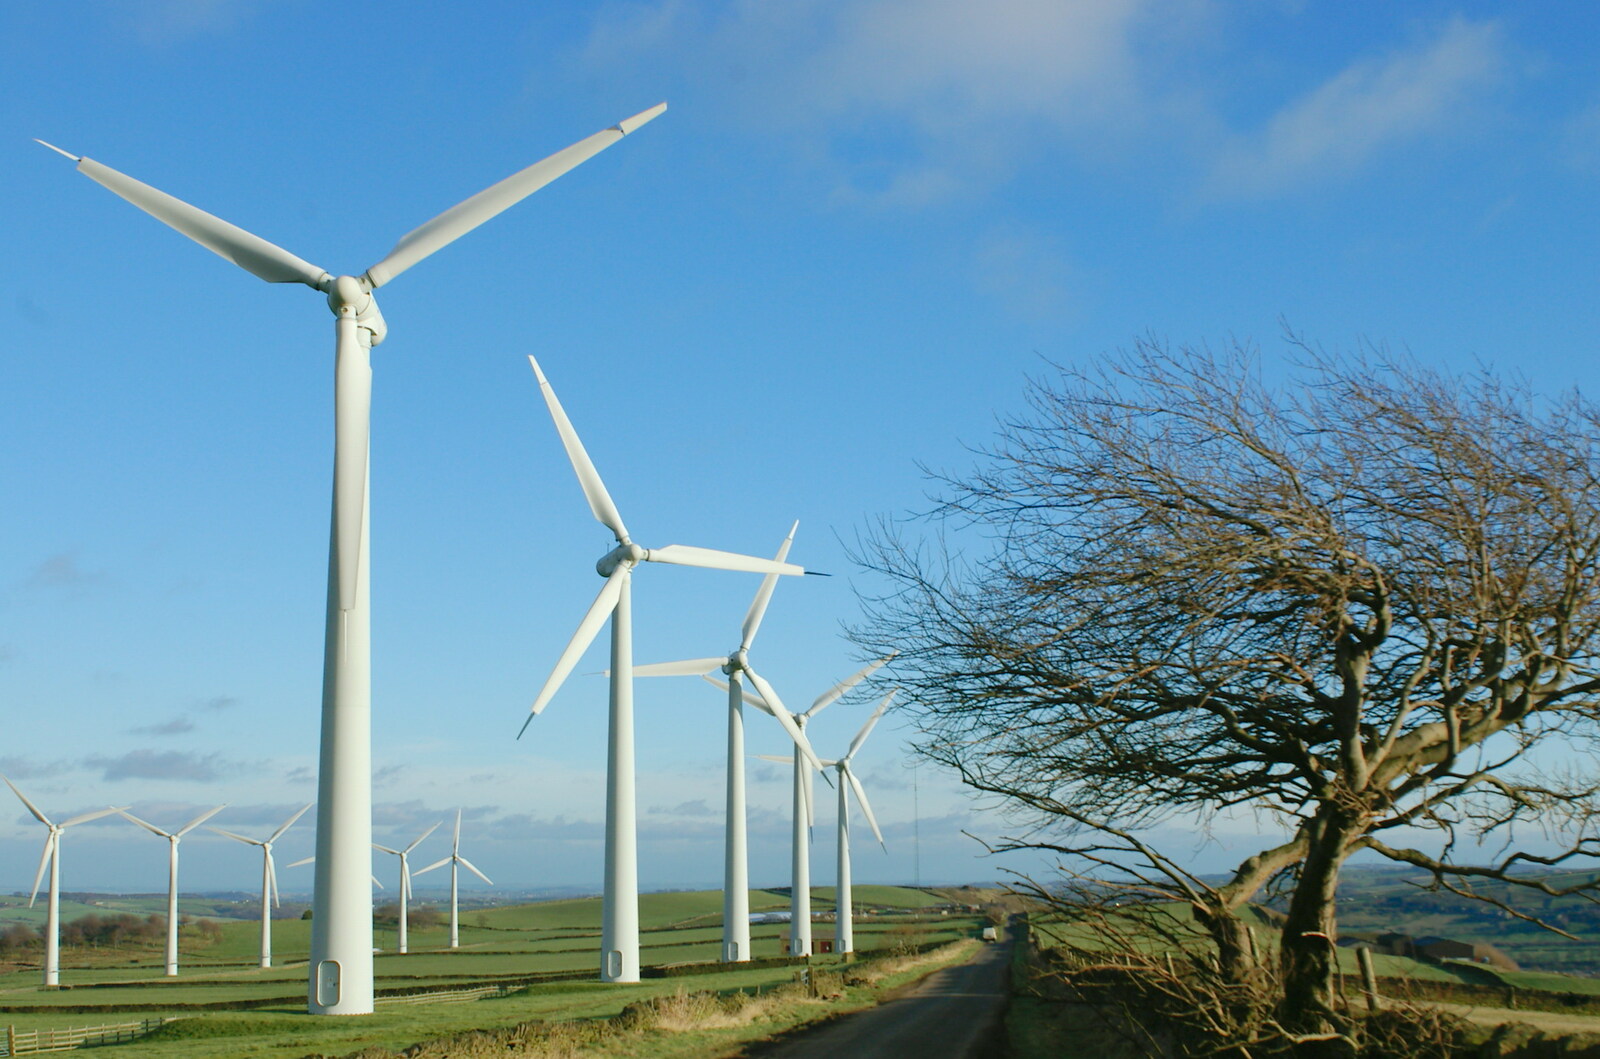 Driving Around Oop North, Hoylandswain, West Yorkshire - 30th January 2005: Wind farm and a windswept tree